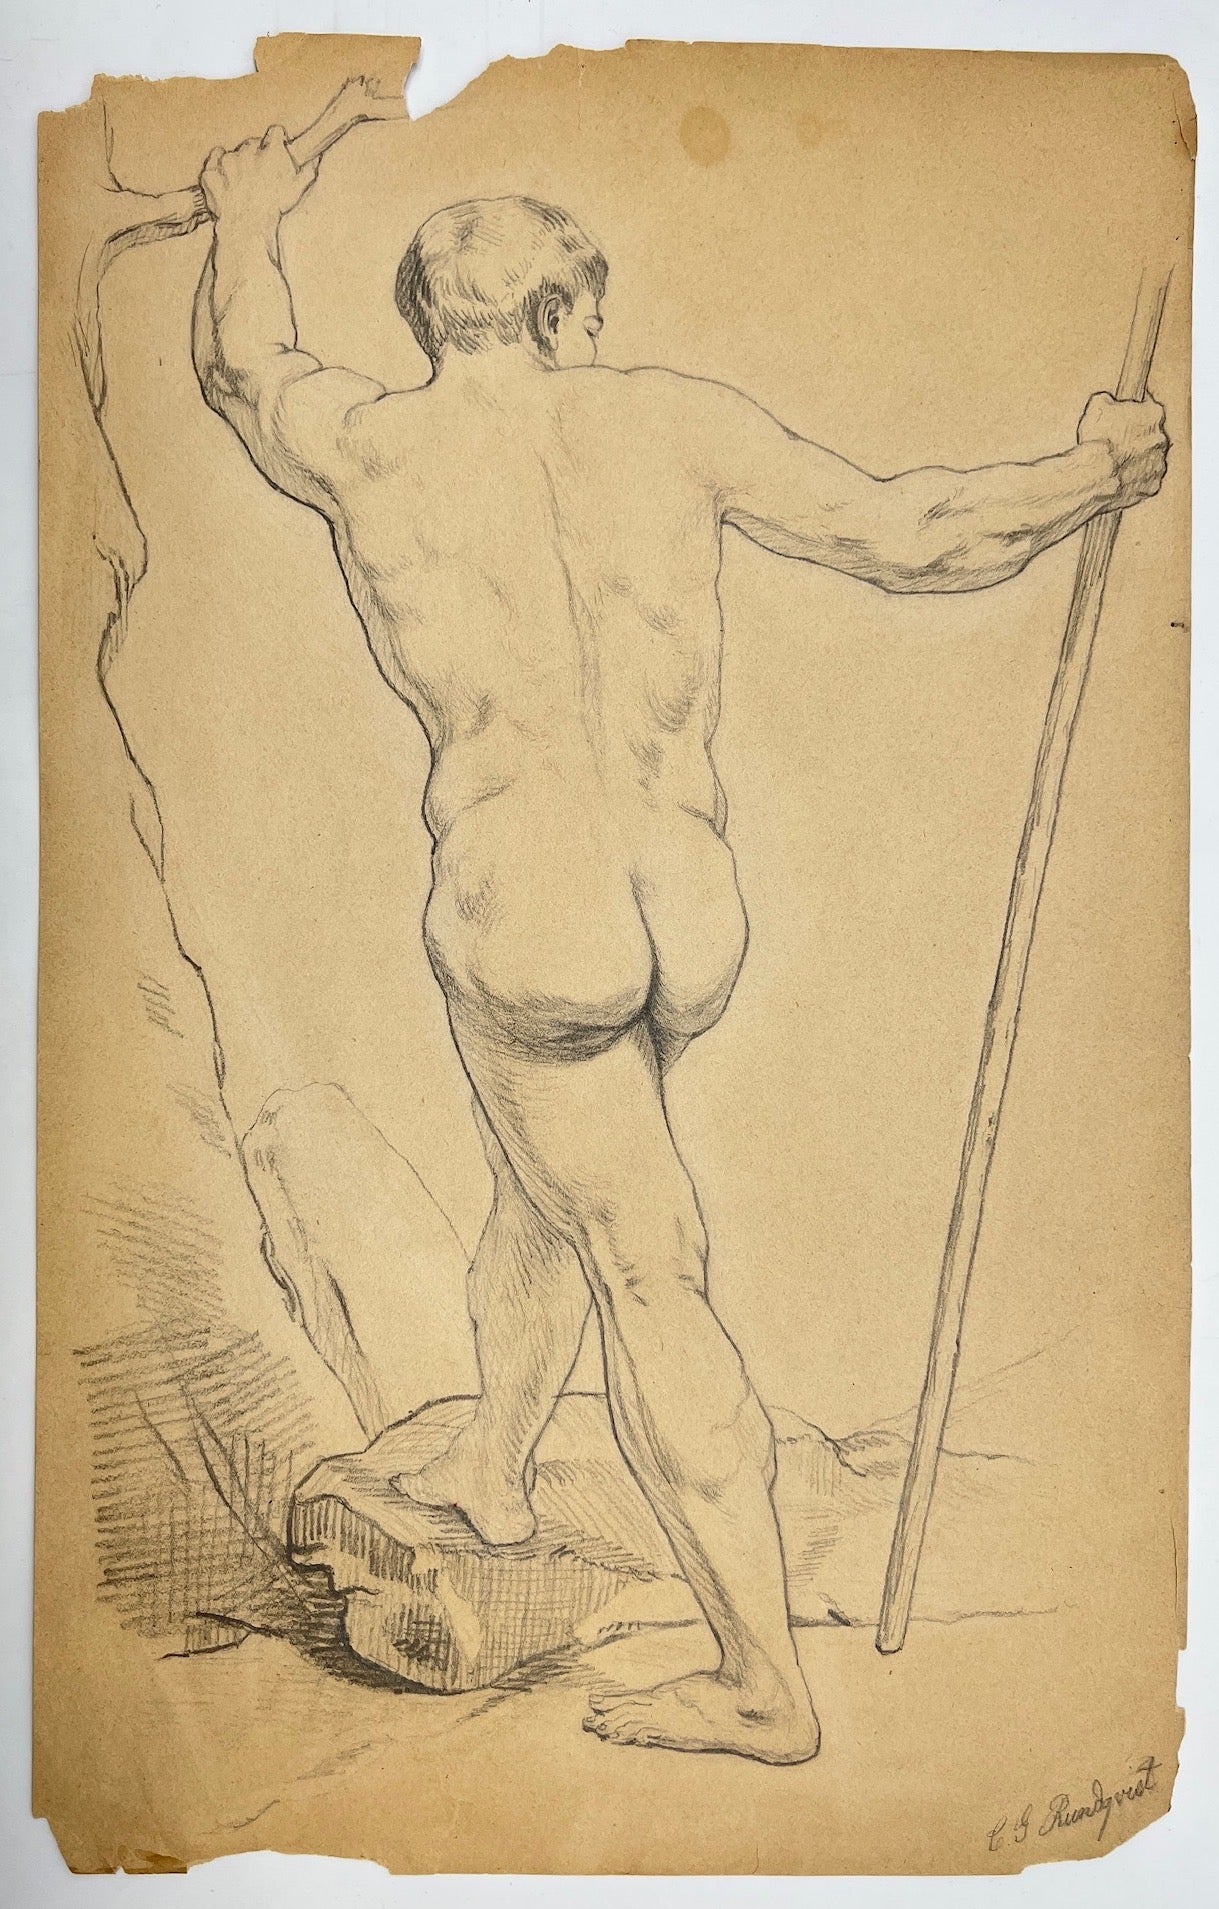 Antique Drawing - Works Student Artists - Academic Drawing - Naked Man - Graphic - Dahlströms Fine Art